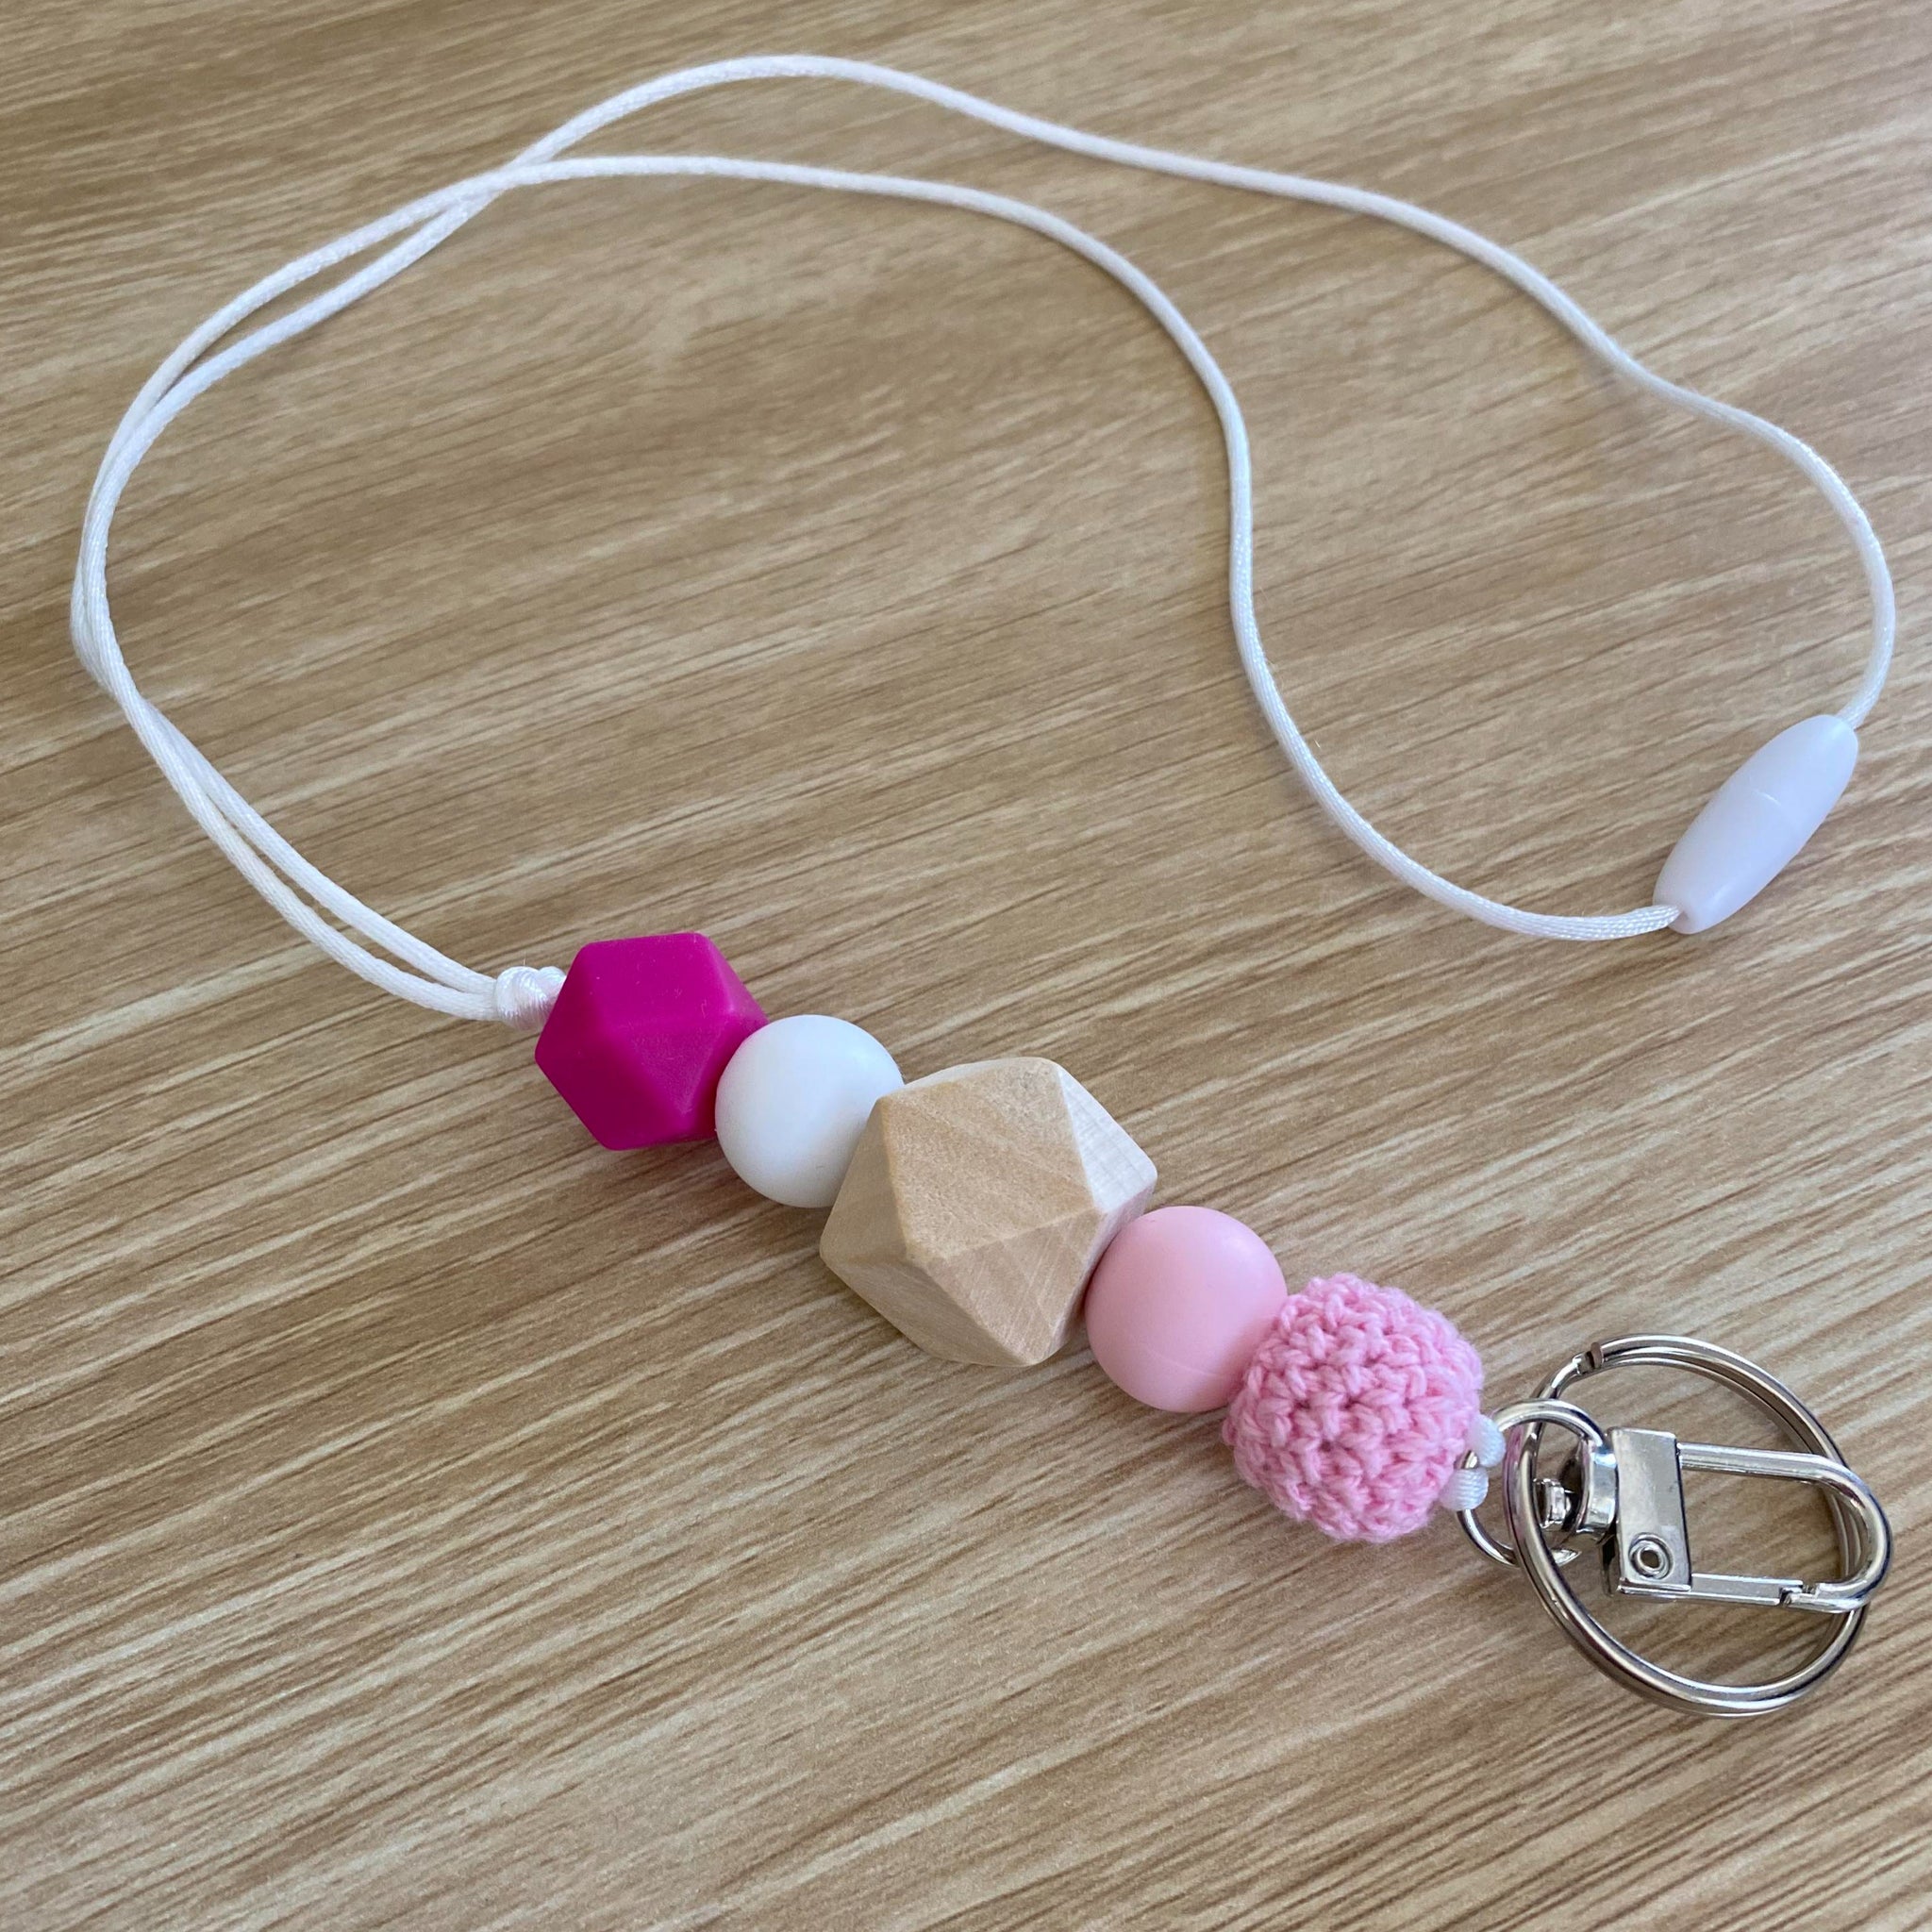 Soft Pink and White Beaded Lanyard